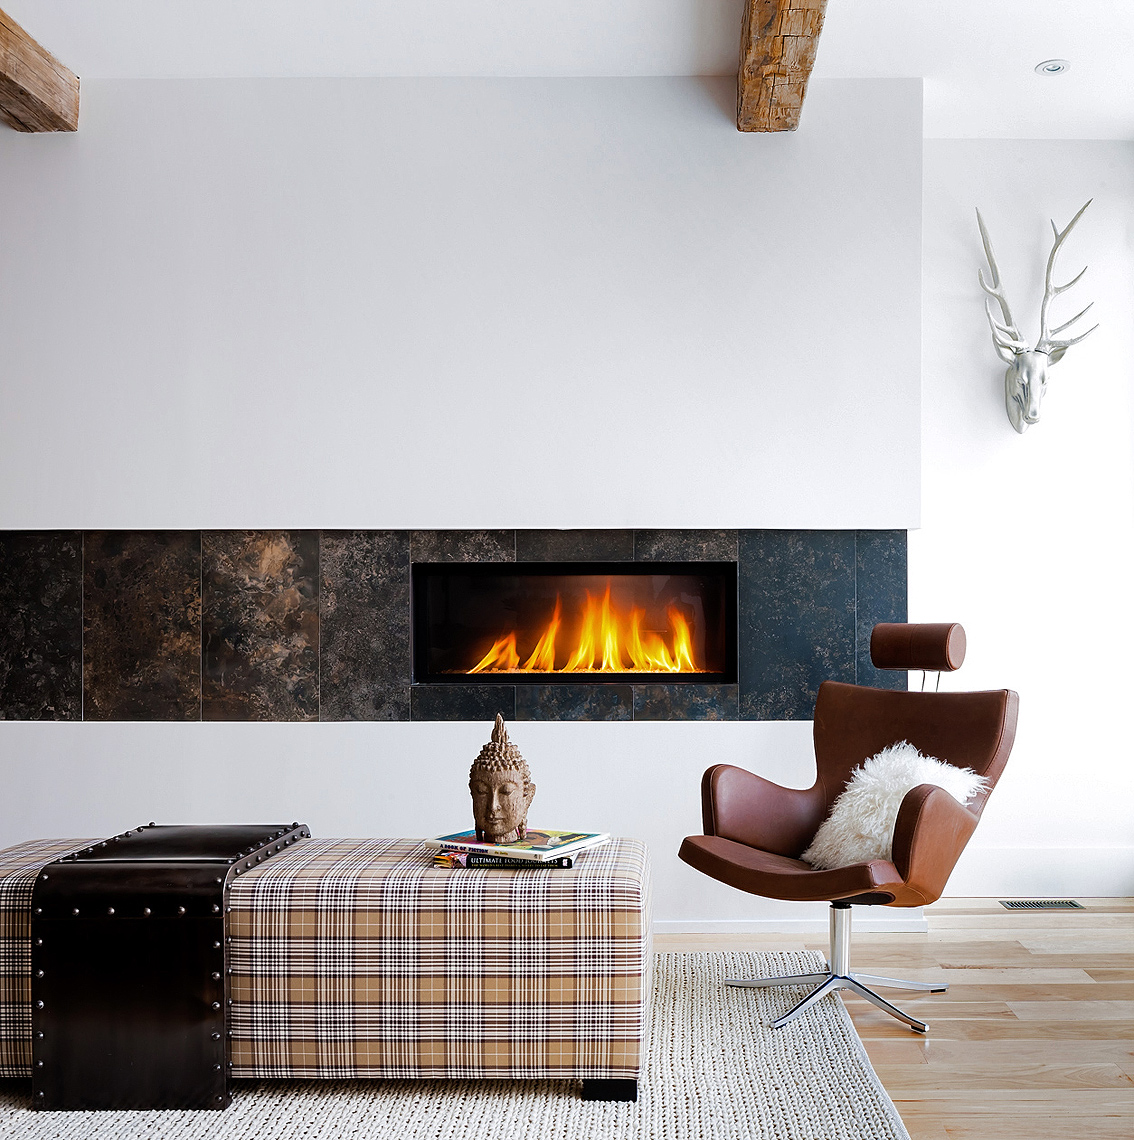 Modern Living Room and Fireplace - Dwell Mag